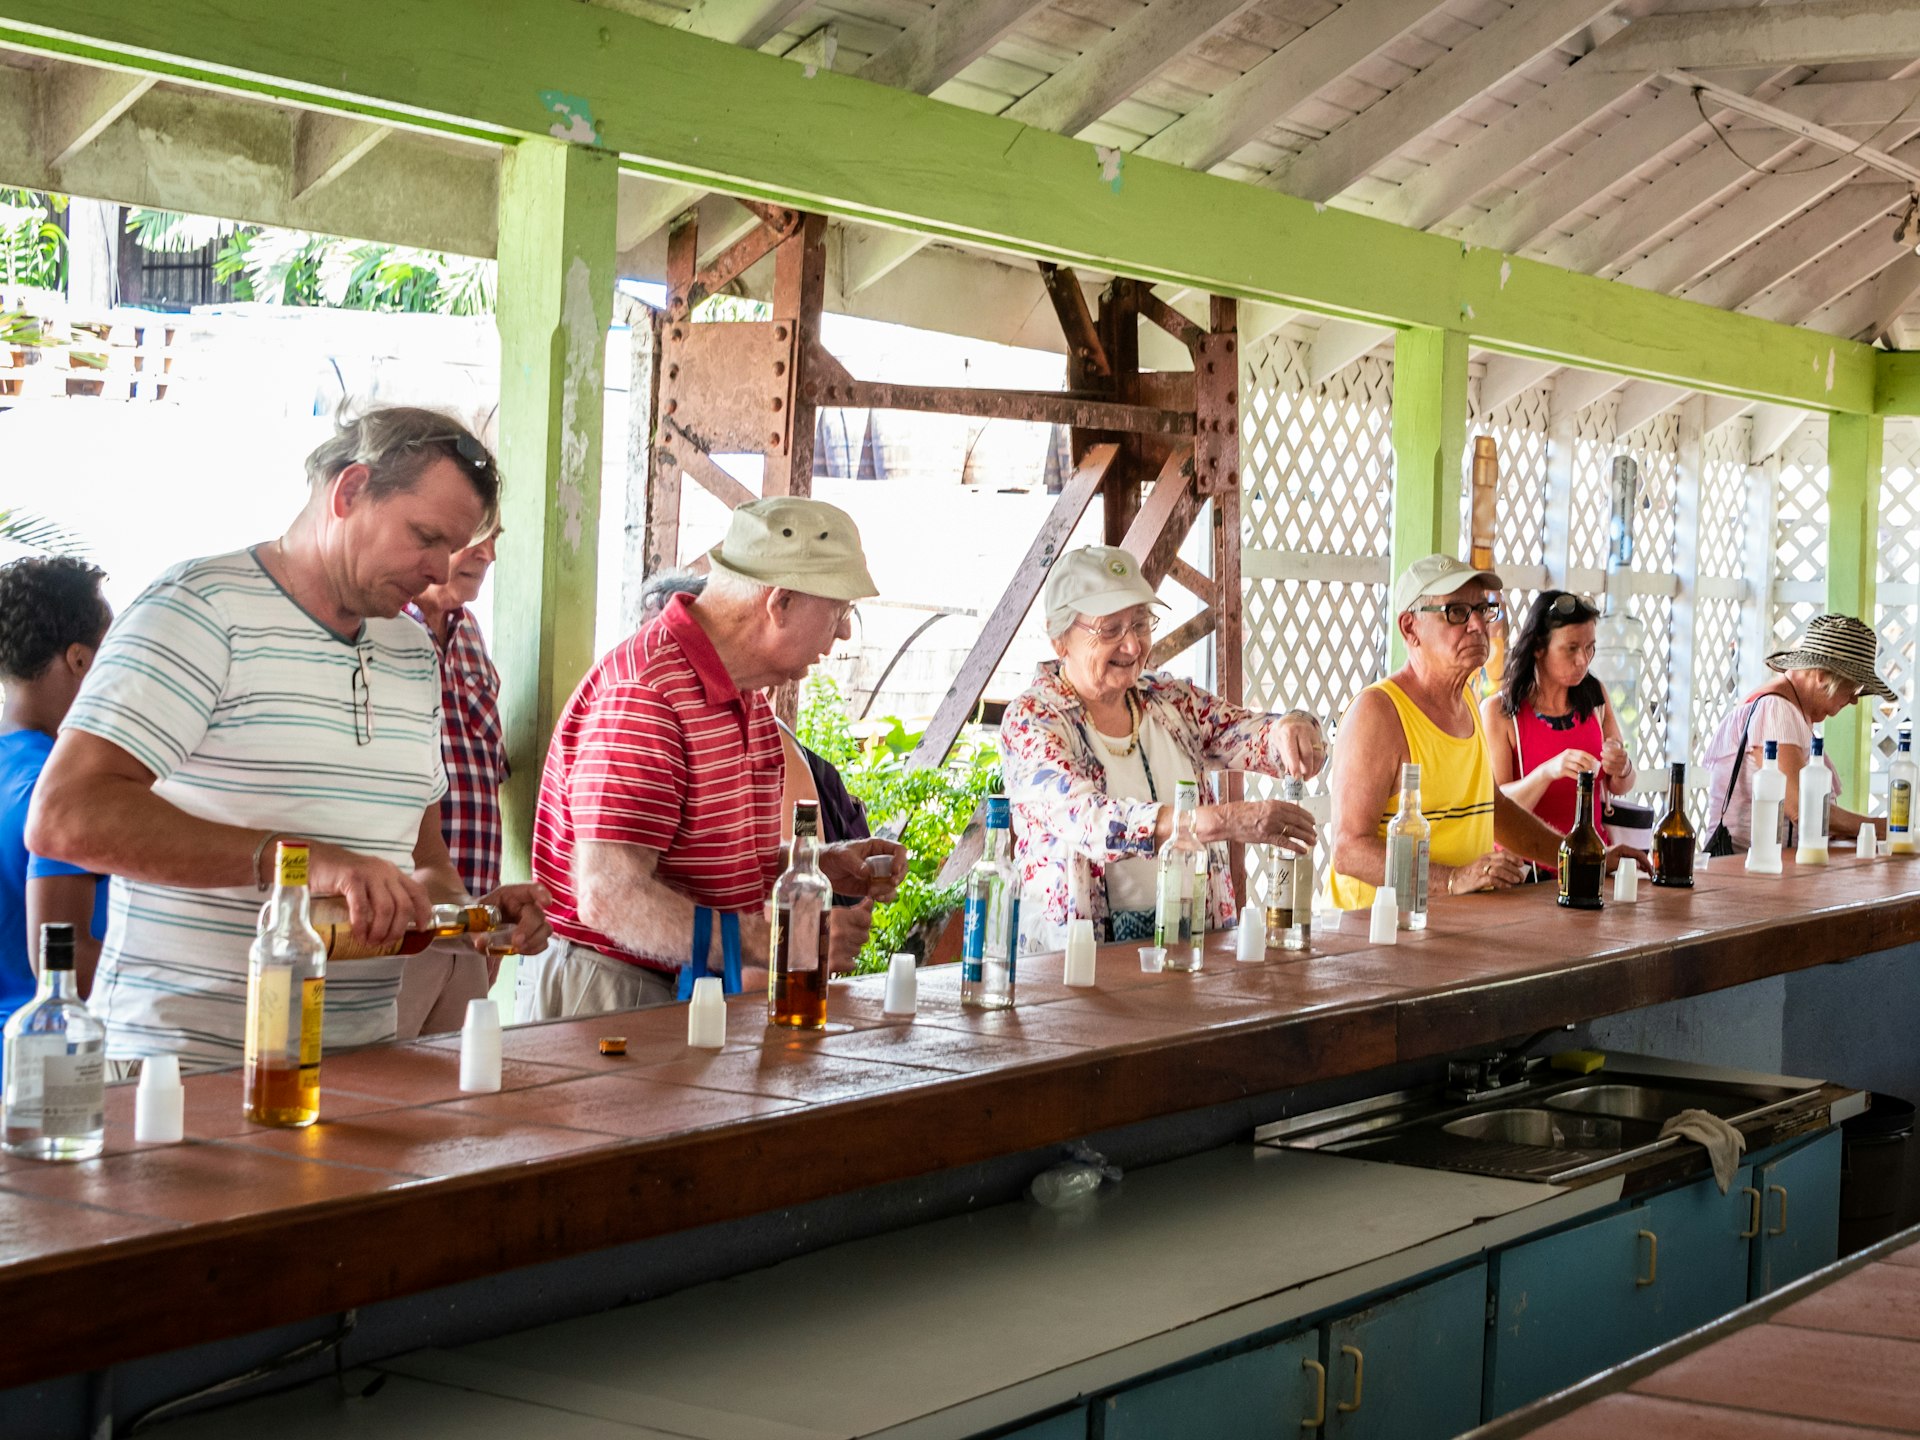 Tourists sampling rums at St Lucia Distillers